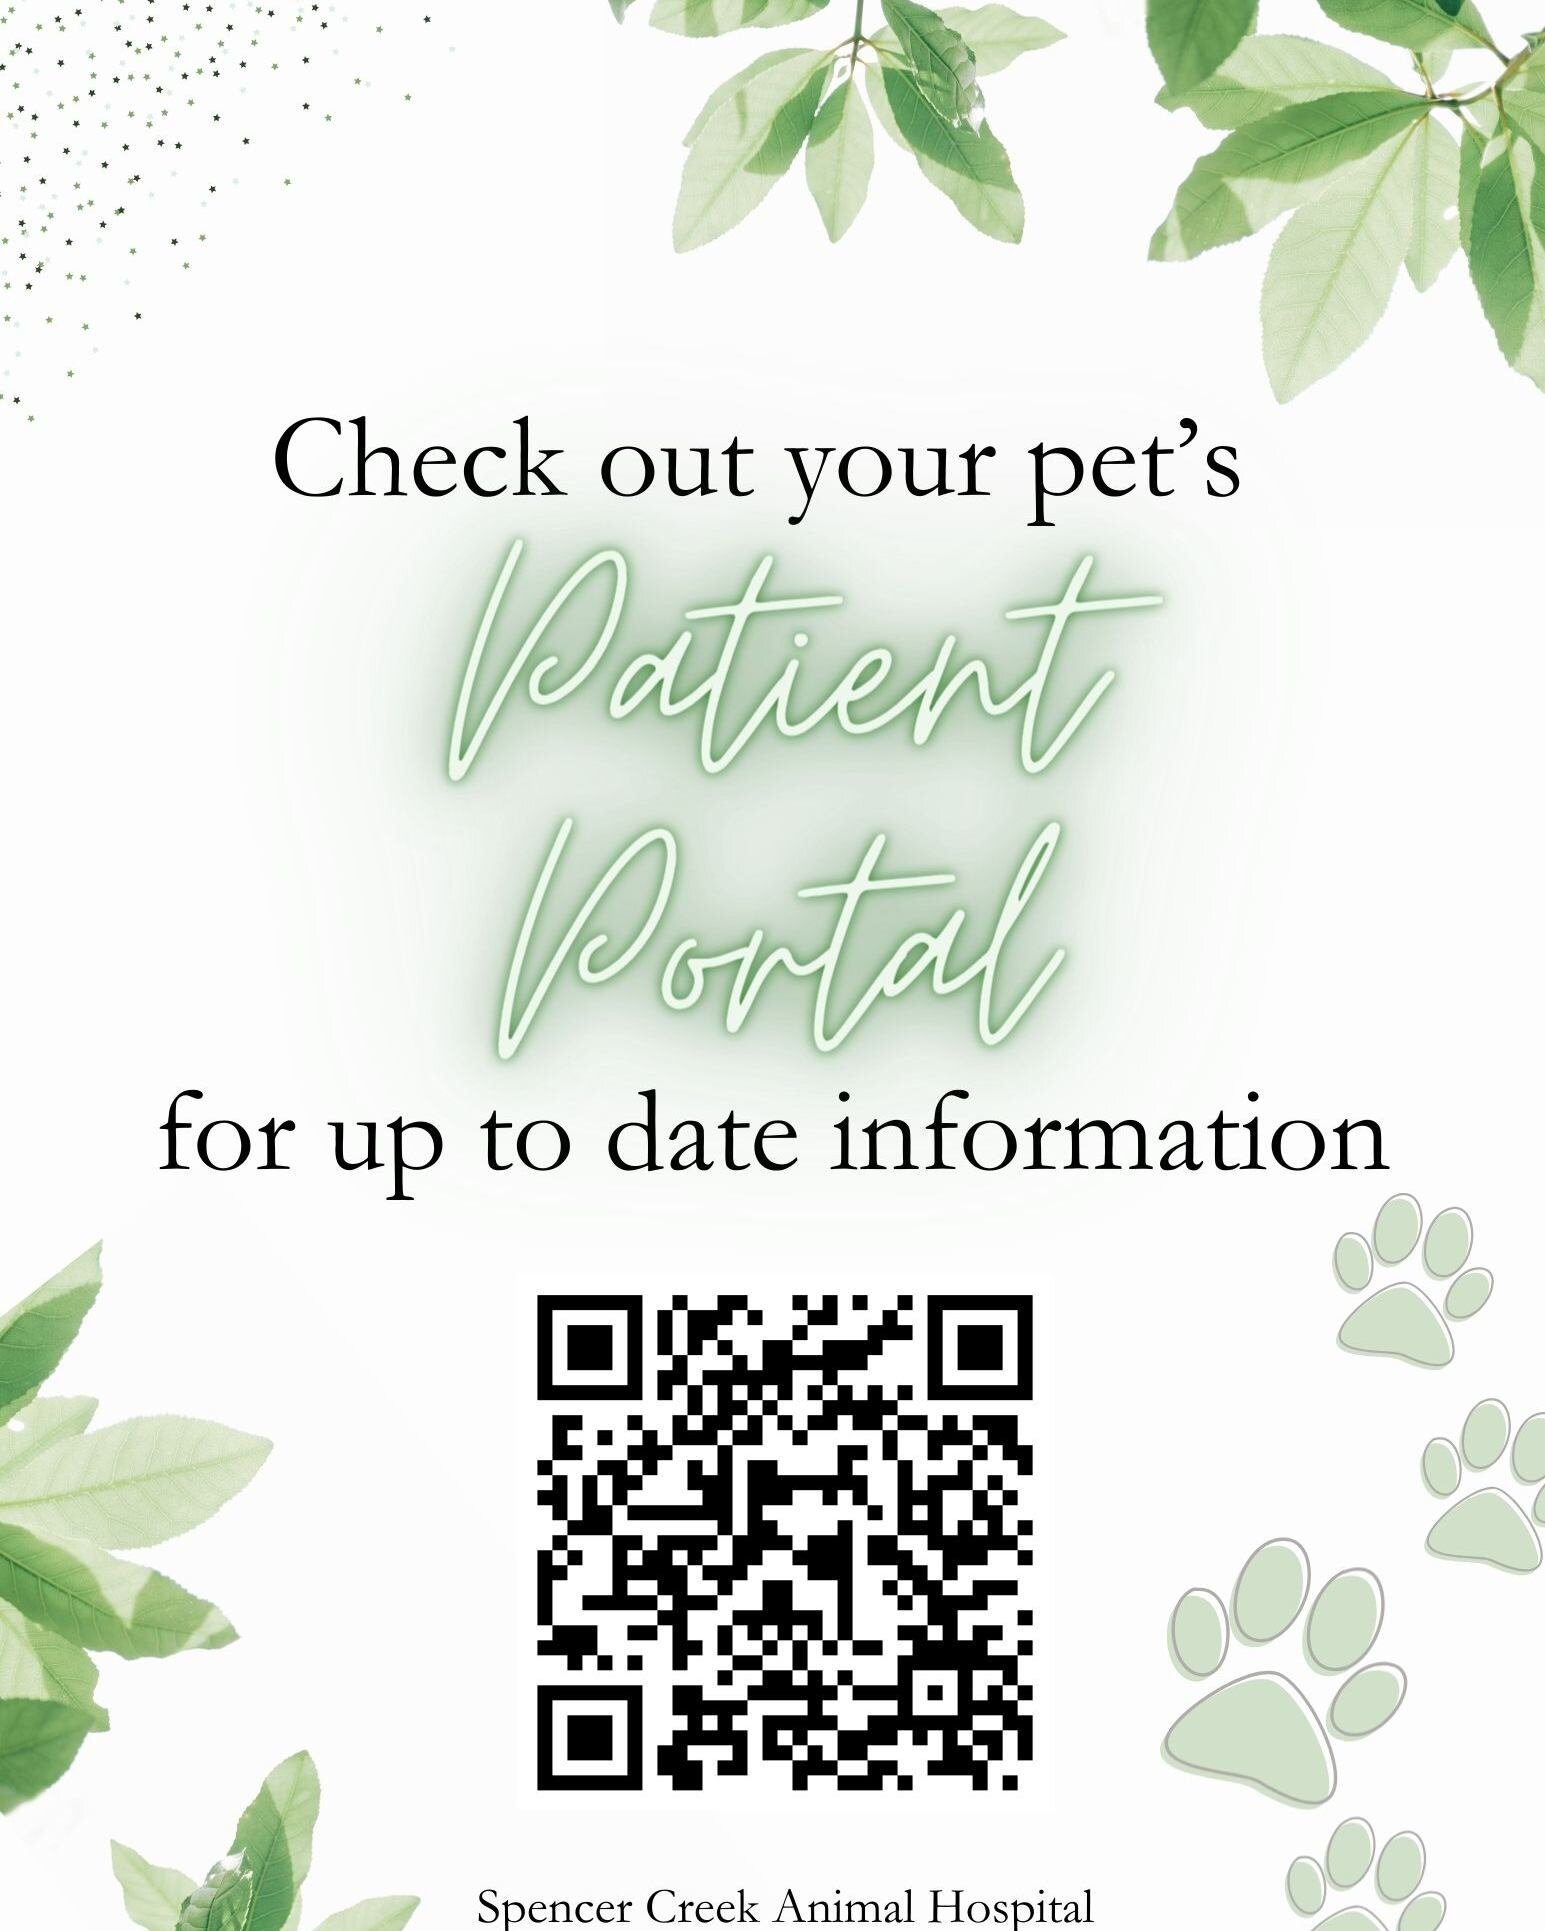 Do you ever want to see your pet's vaccine and medication history? Well now you can! Check out your pet's online Patient Portal - see their medical profile, update their photos, and more!